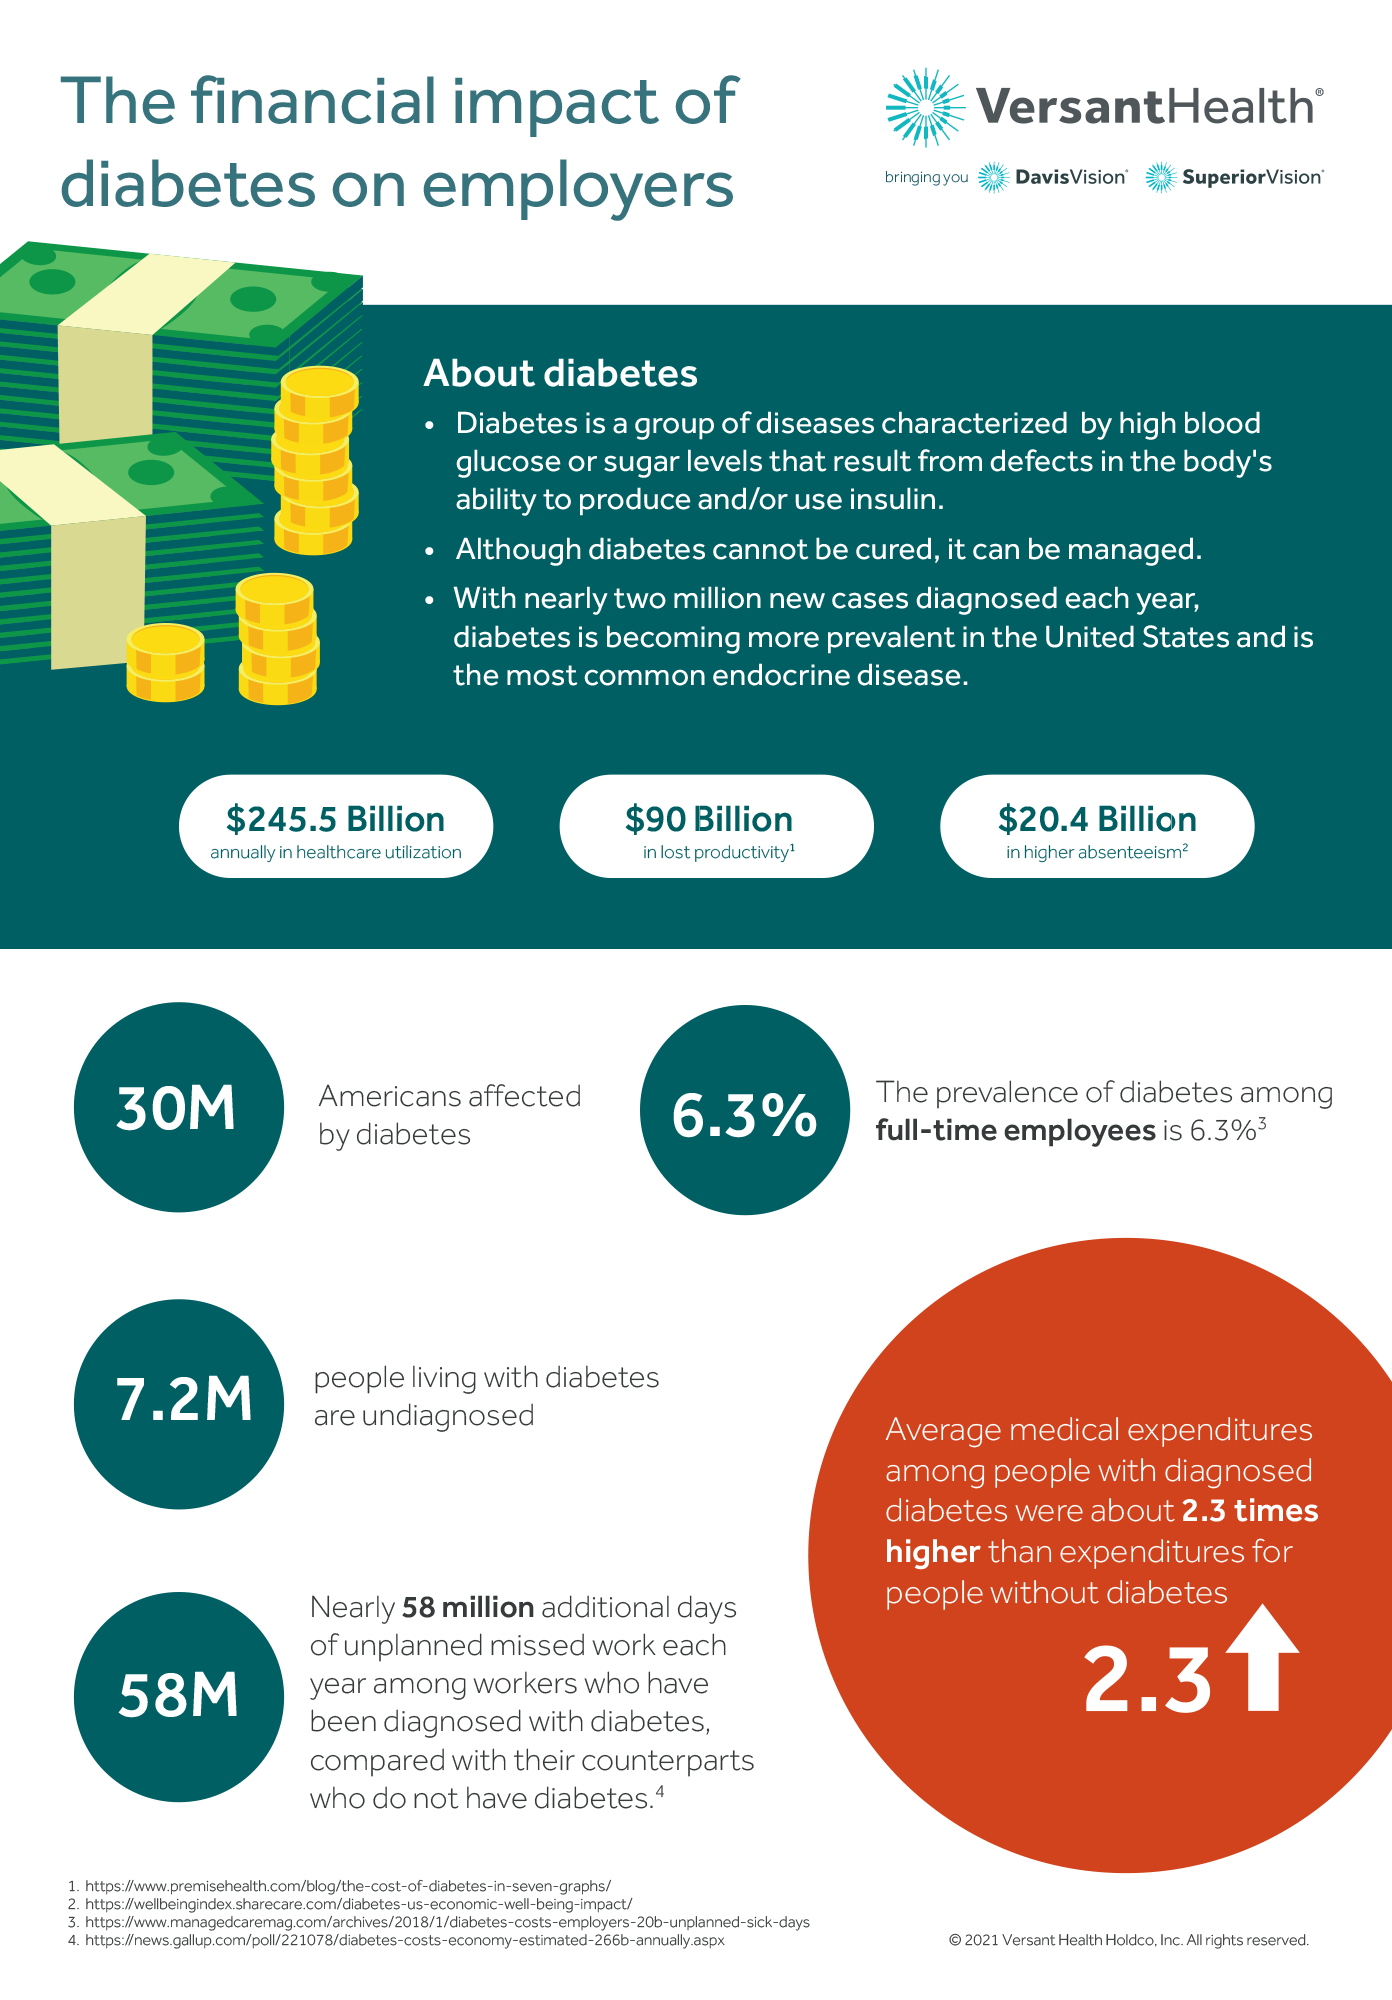 An infographic that talks about the financial impact of diabetes on businesses